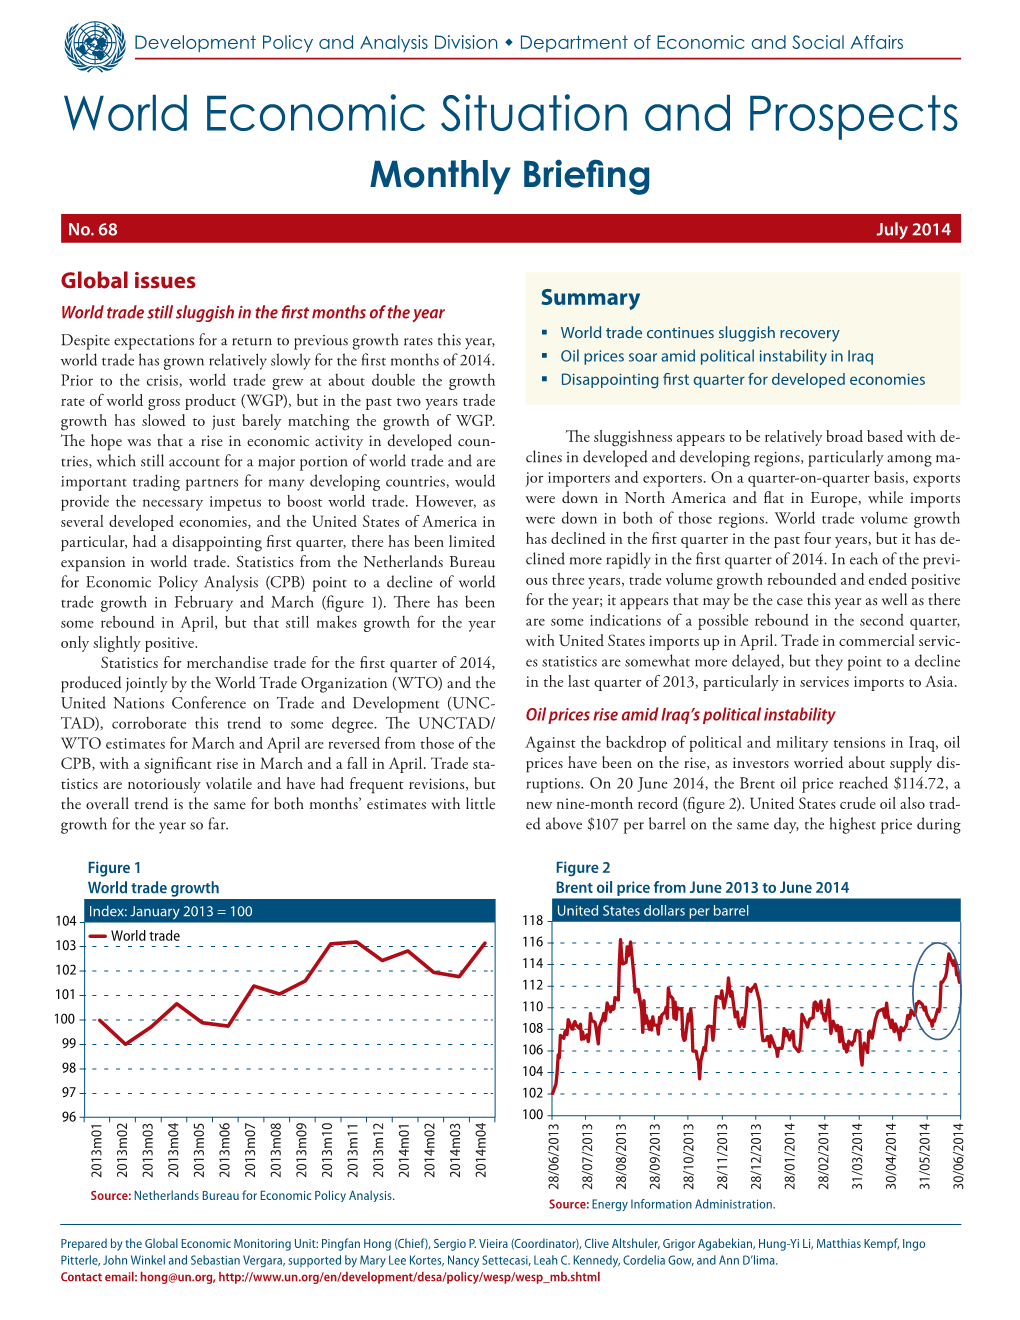 World Economic Situation and Prospects Monthly Briefing